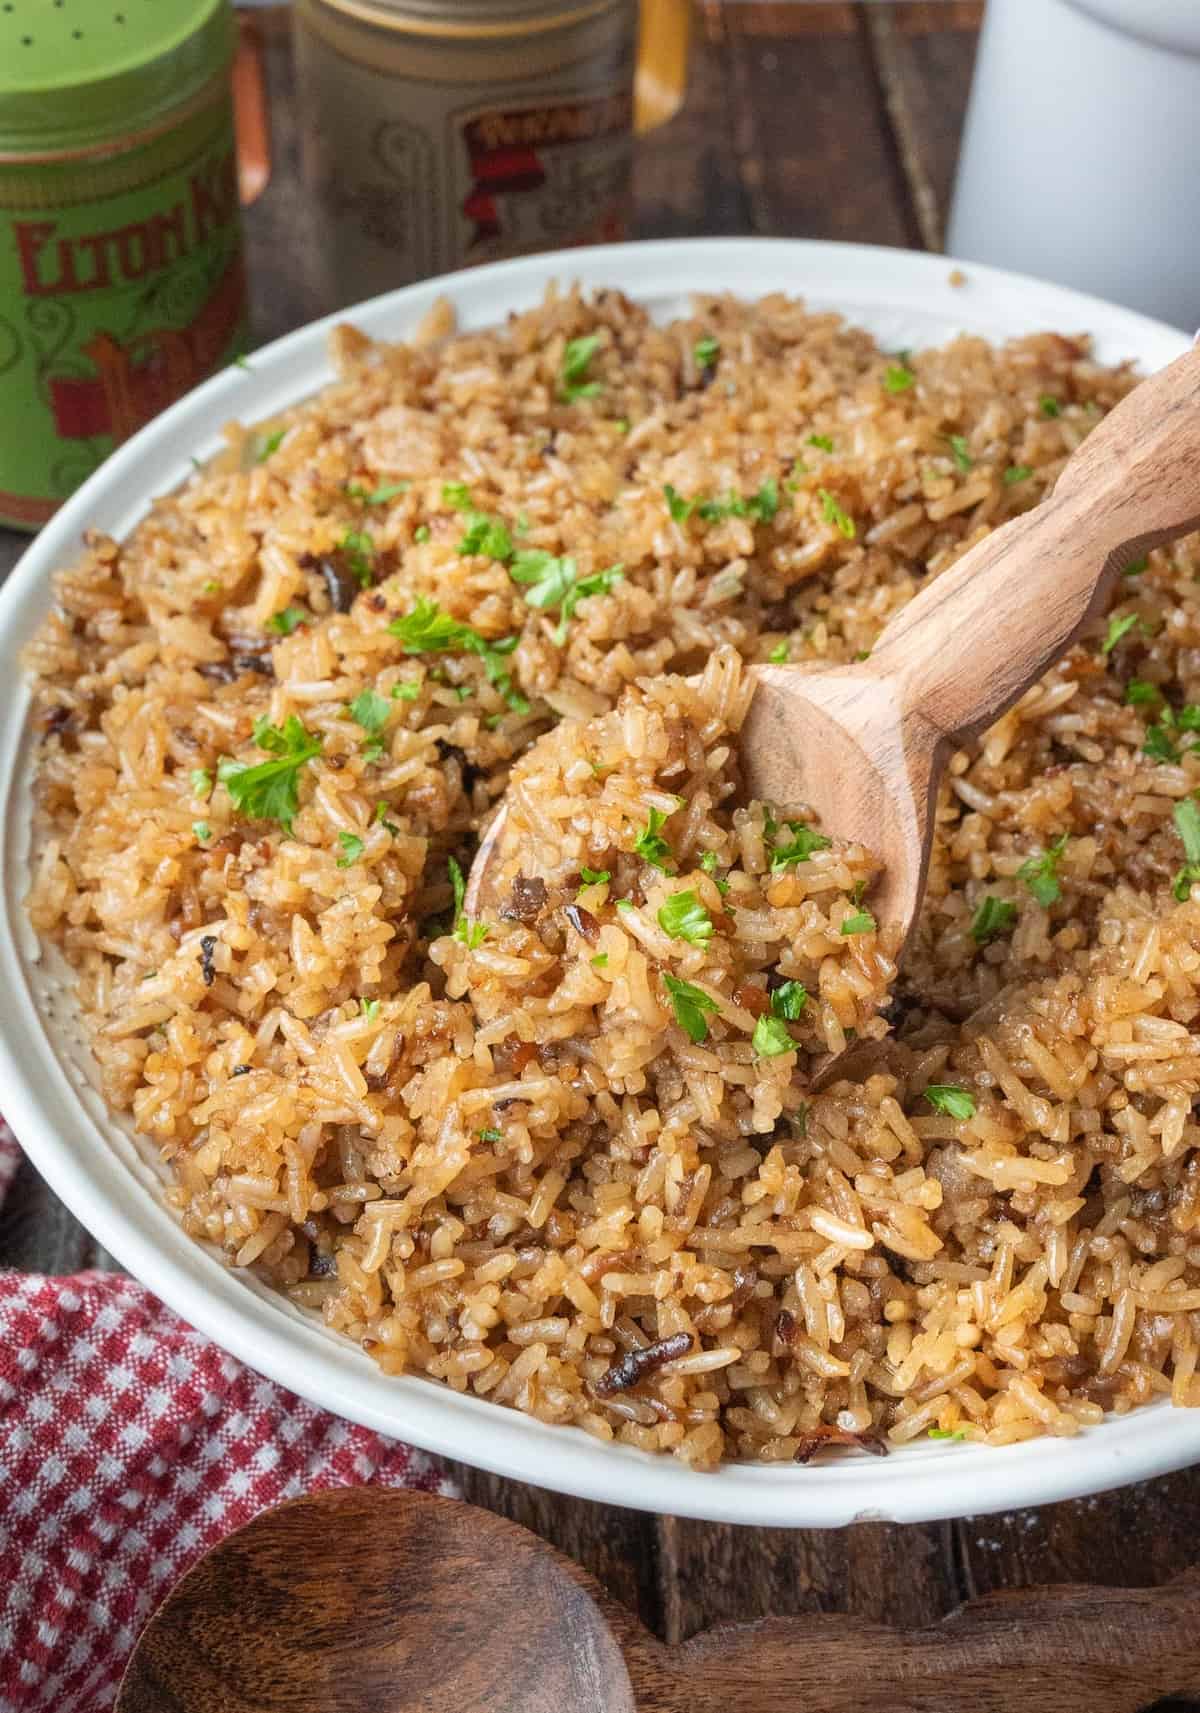 A spoon scooping up a bite of baked rice.